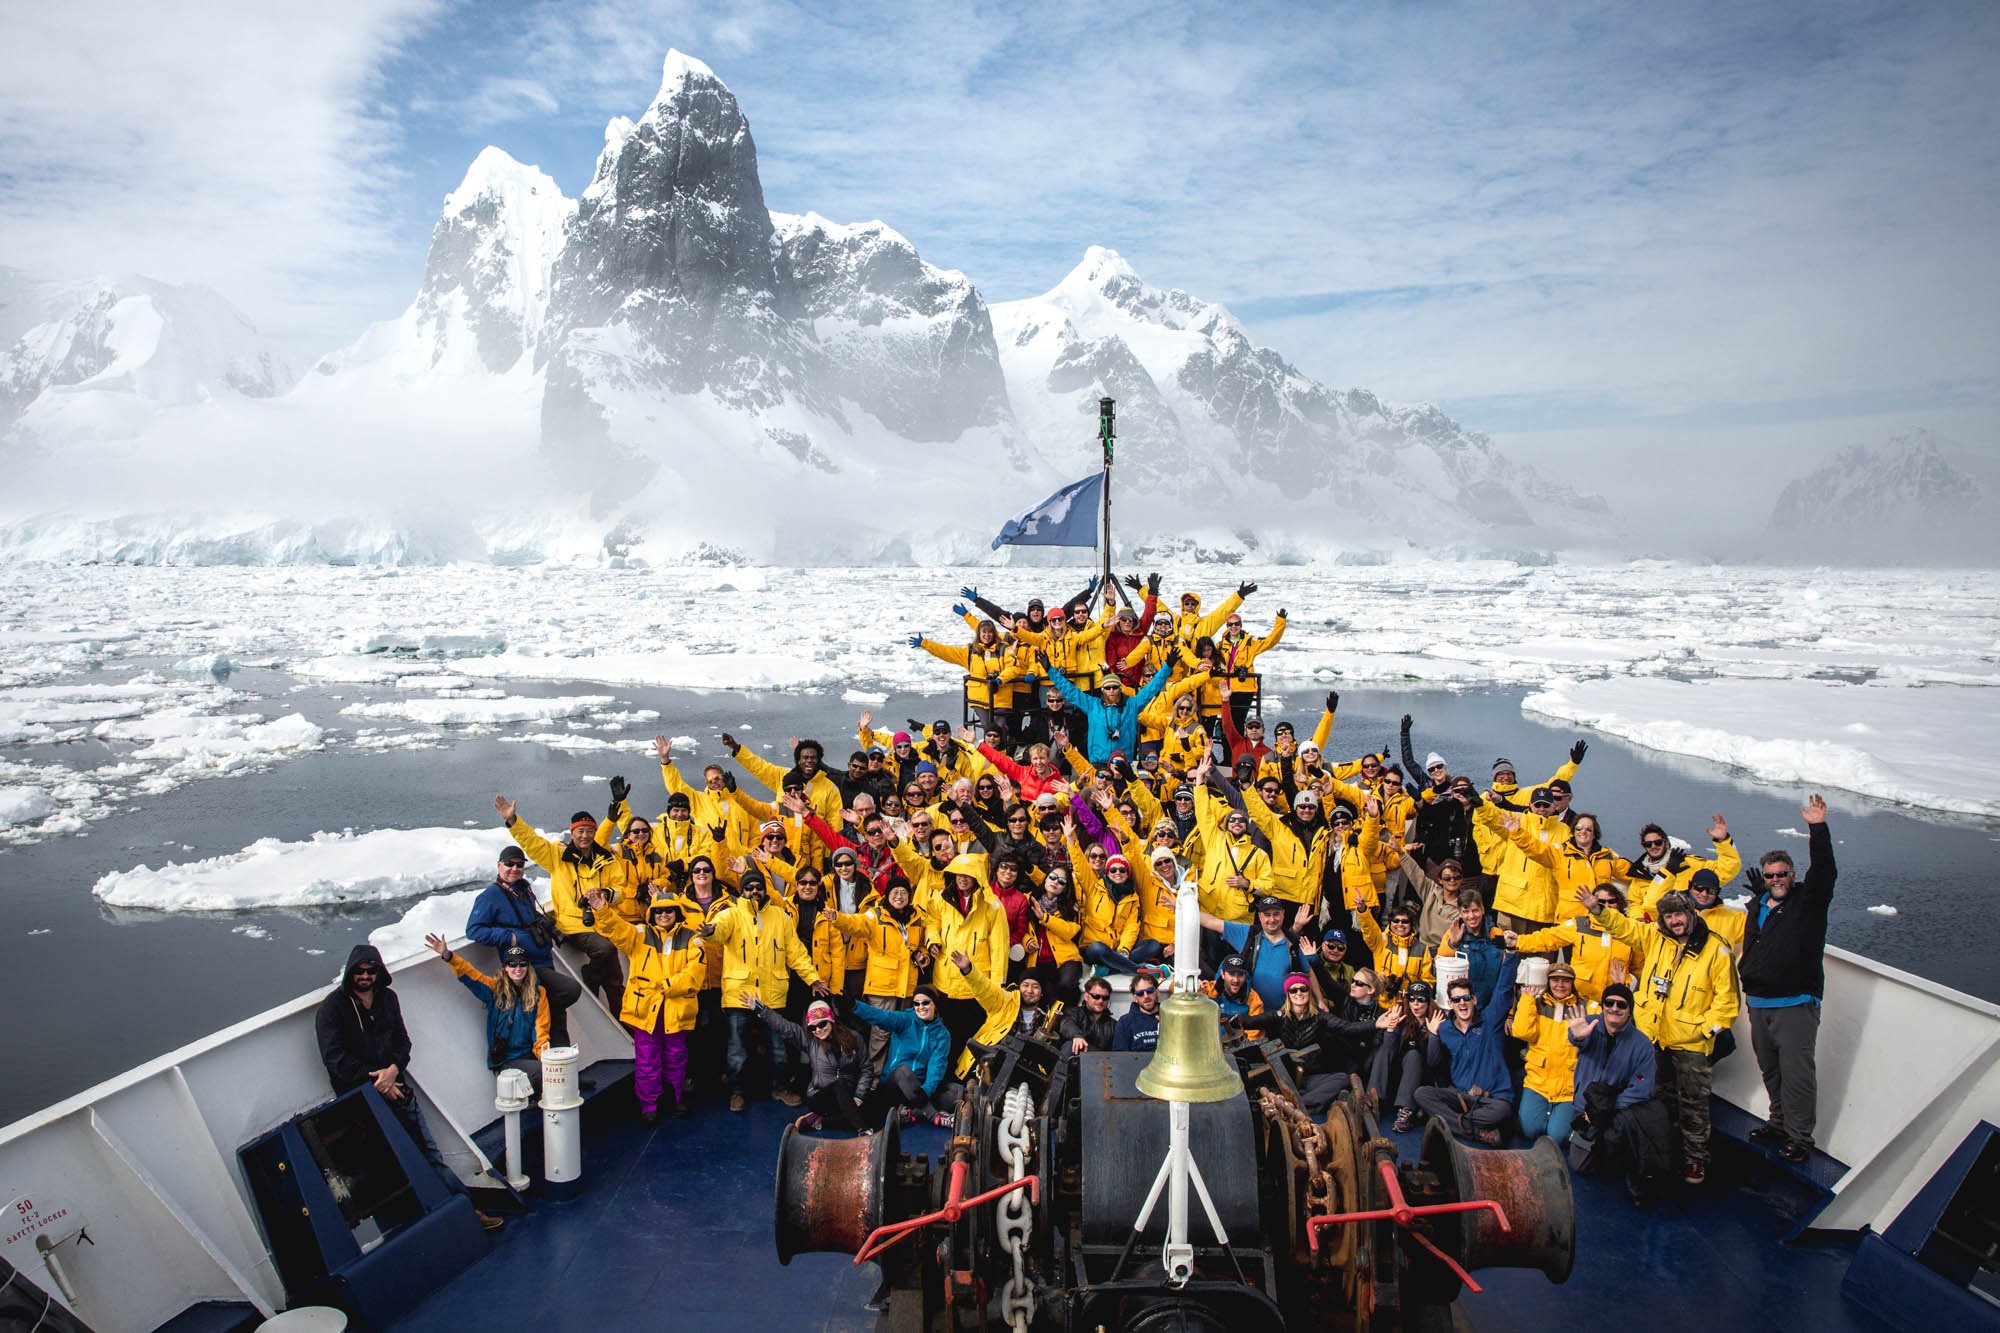 Passengers pose for a group photo on the bow of the ship